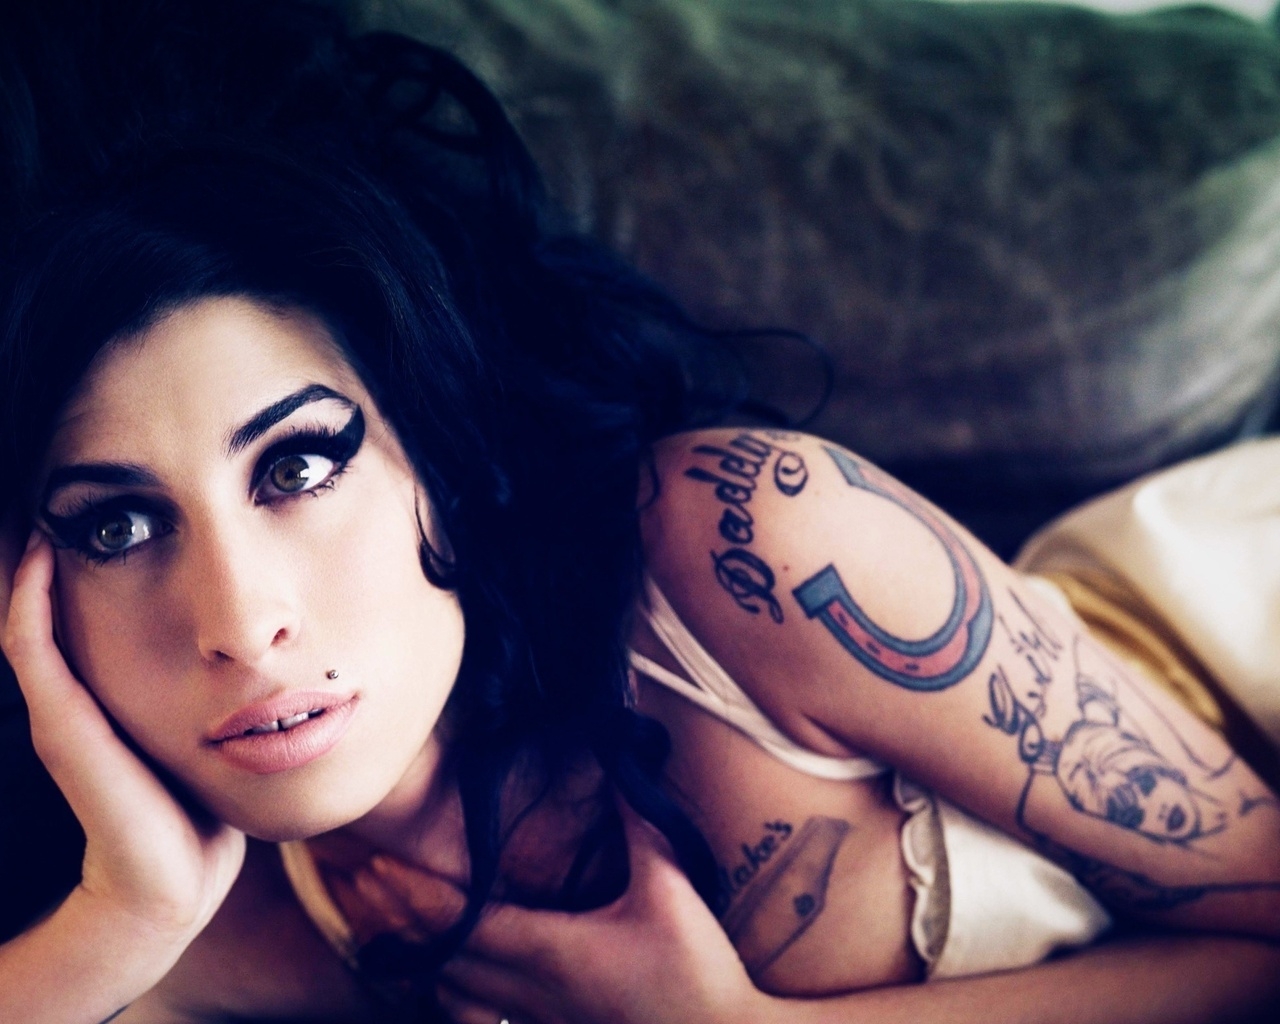 Beautiful Amy Winehouse for 1280 x 1024 resolution